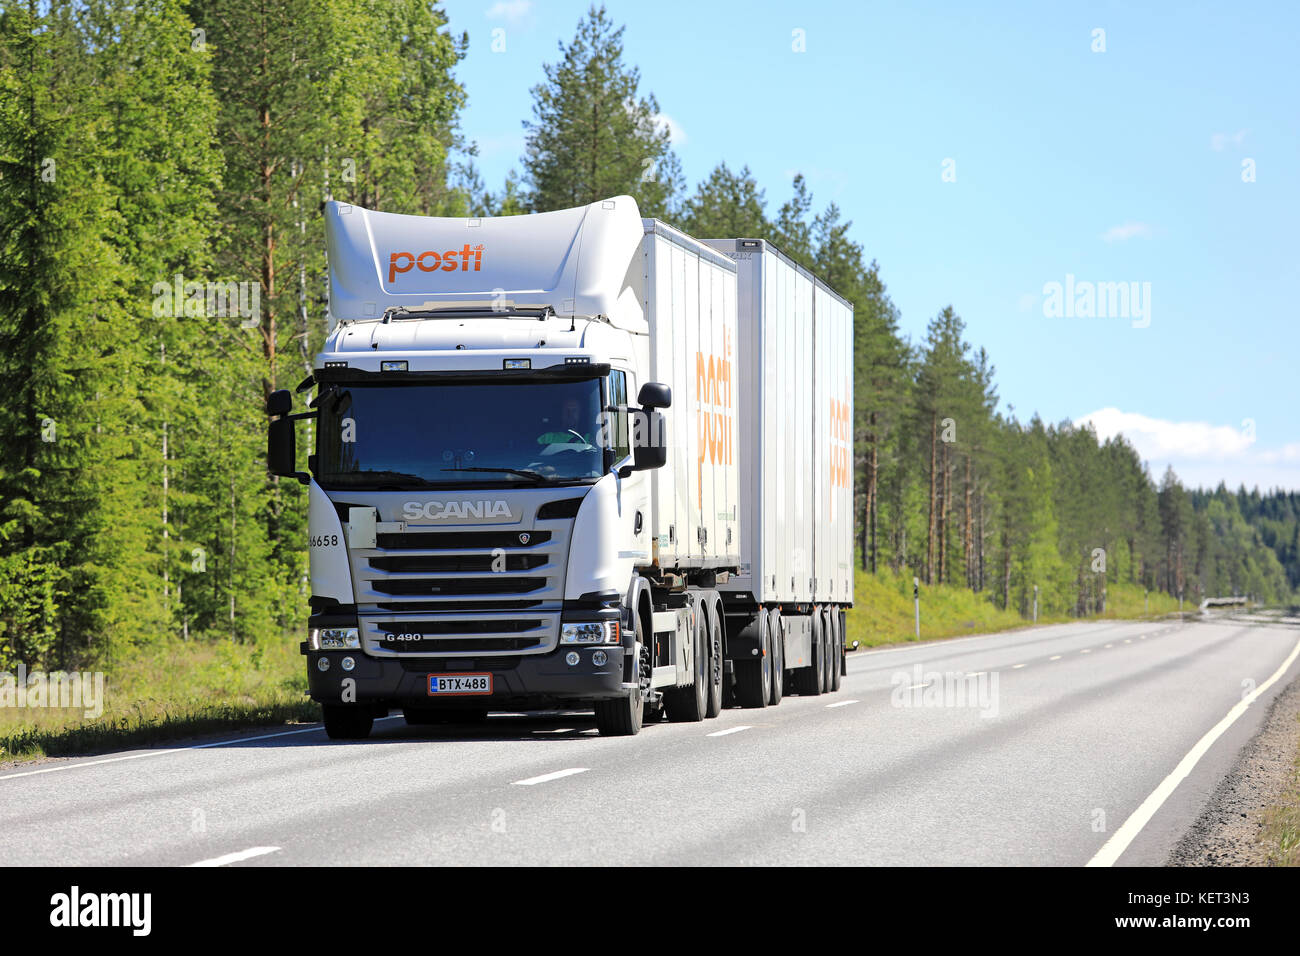 KEURUU, FINLAND - JULY 7, 2017: White Scania G490 cargo truck hauls Finnish Posti Group deliveries along road in Central Finland on a beautiful day of Stock Photo